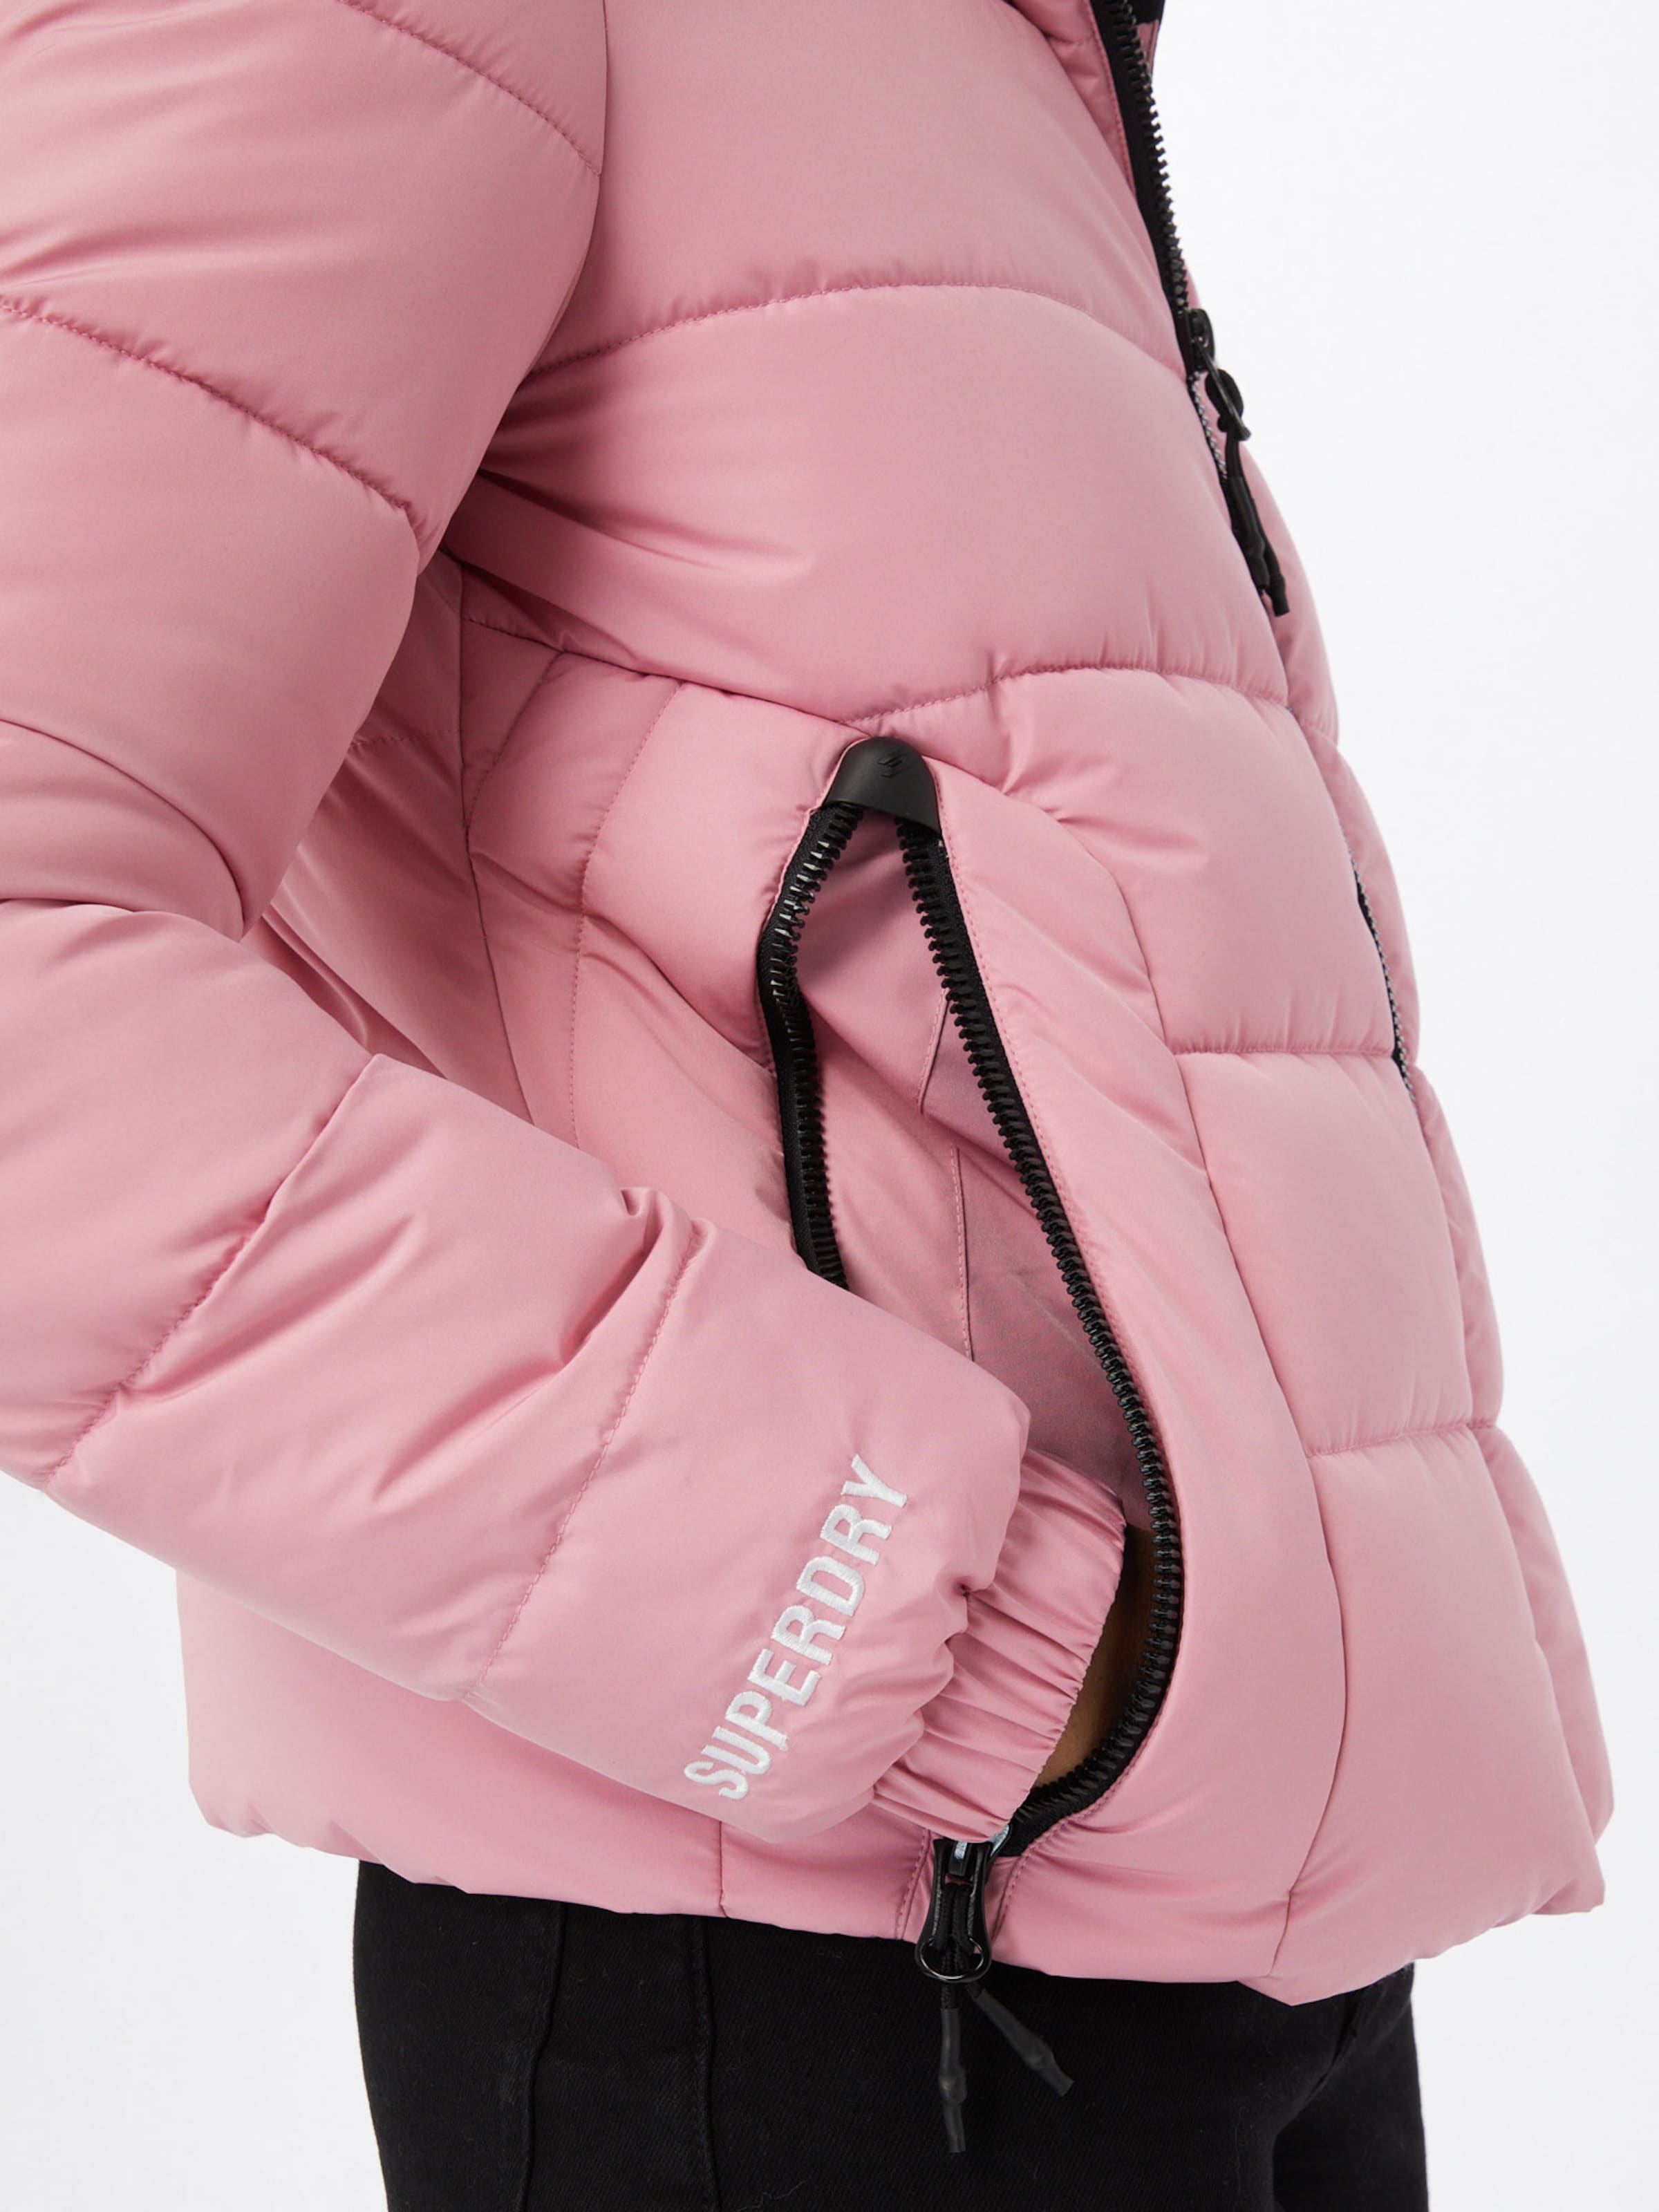 Snoep Beknopt theater Superdry Jacke in Rosa | ABOUT YOU